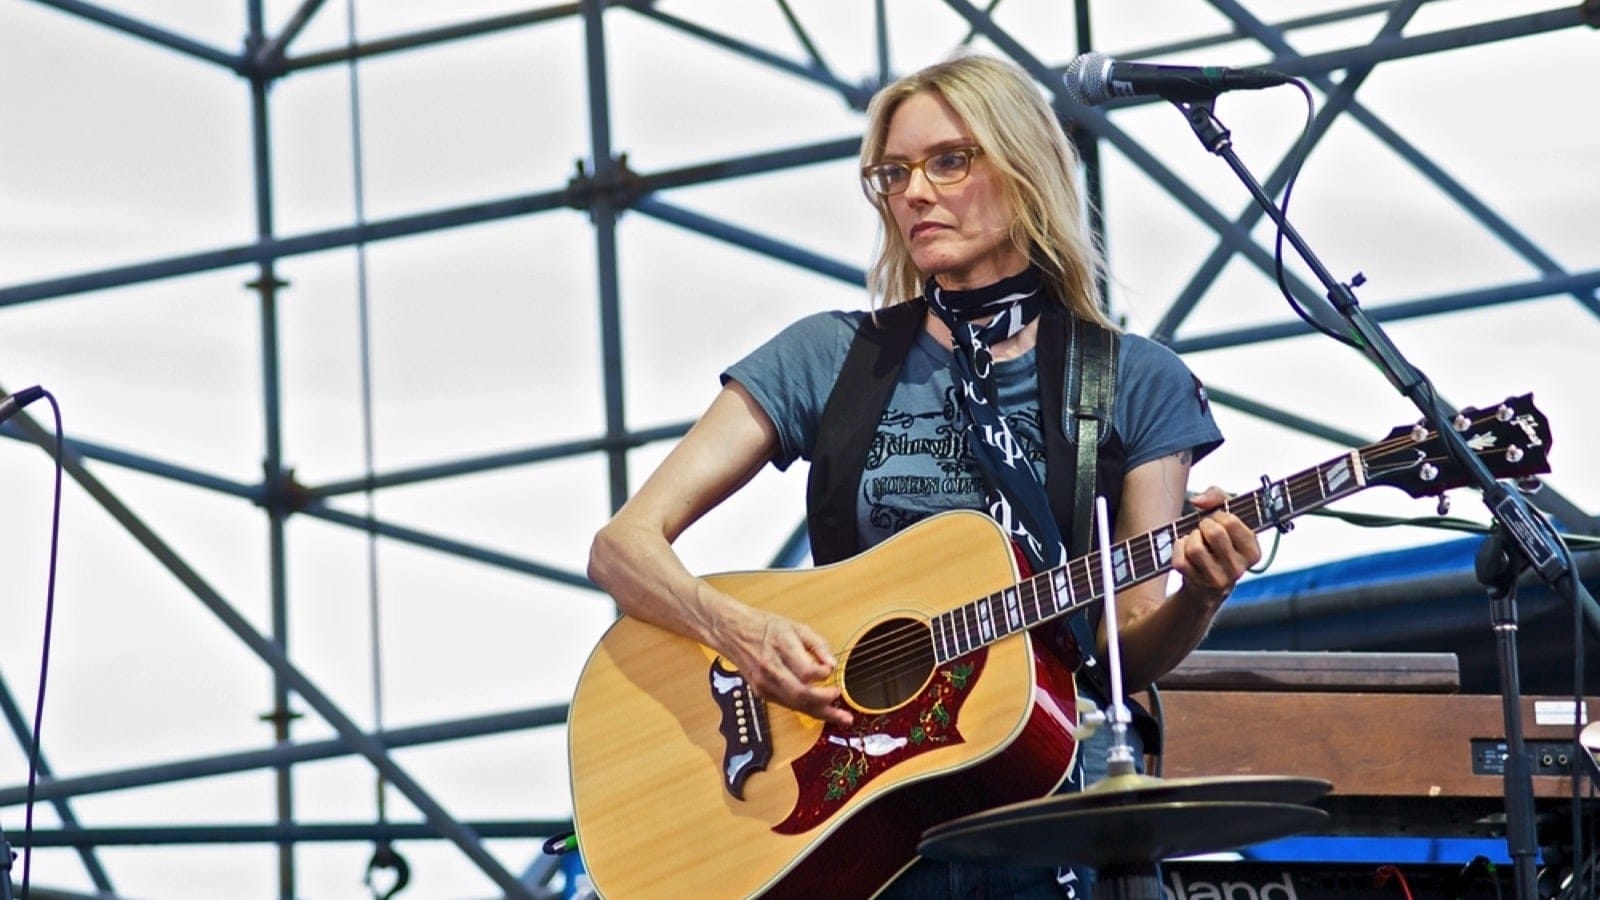 CAMDEN, NJ – JULY 26: Aimee Mann performs at the WXPN Xponential Music Festival 2009 at Wiggins Park on July 26, 2009 in Camden, NJ.